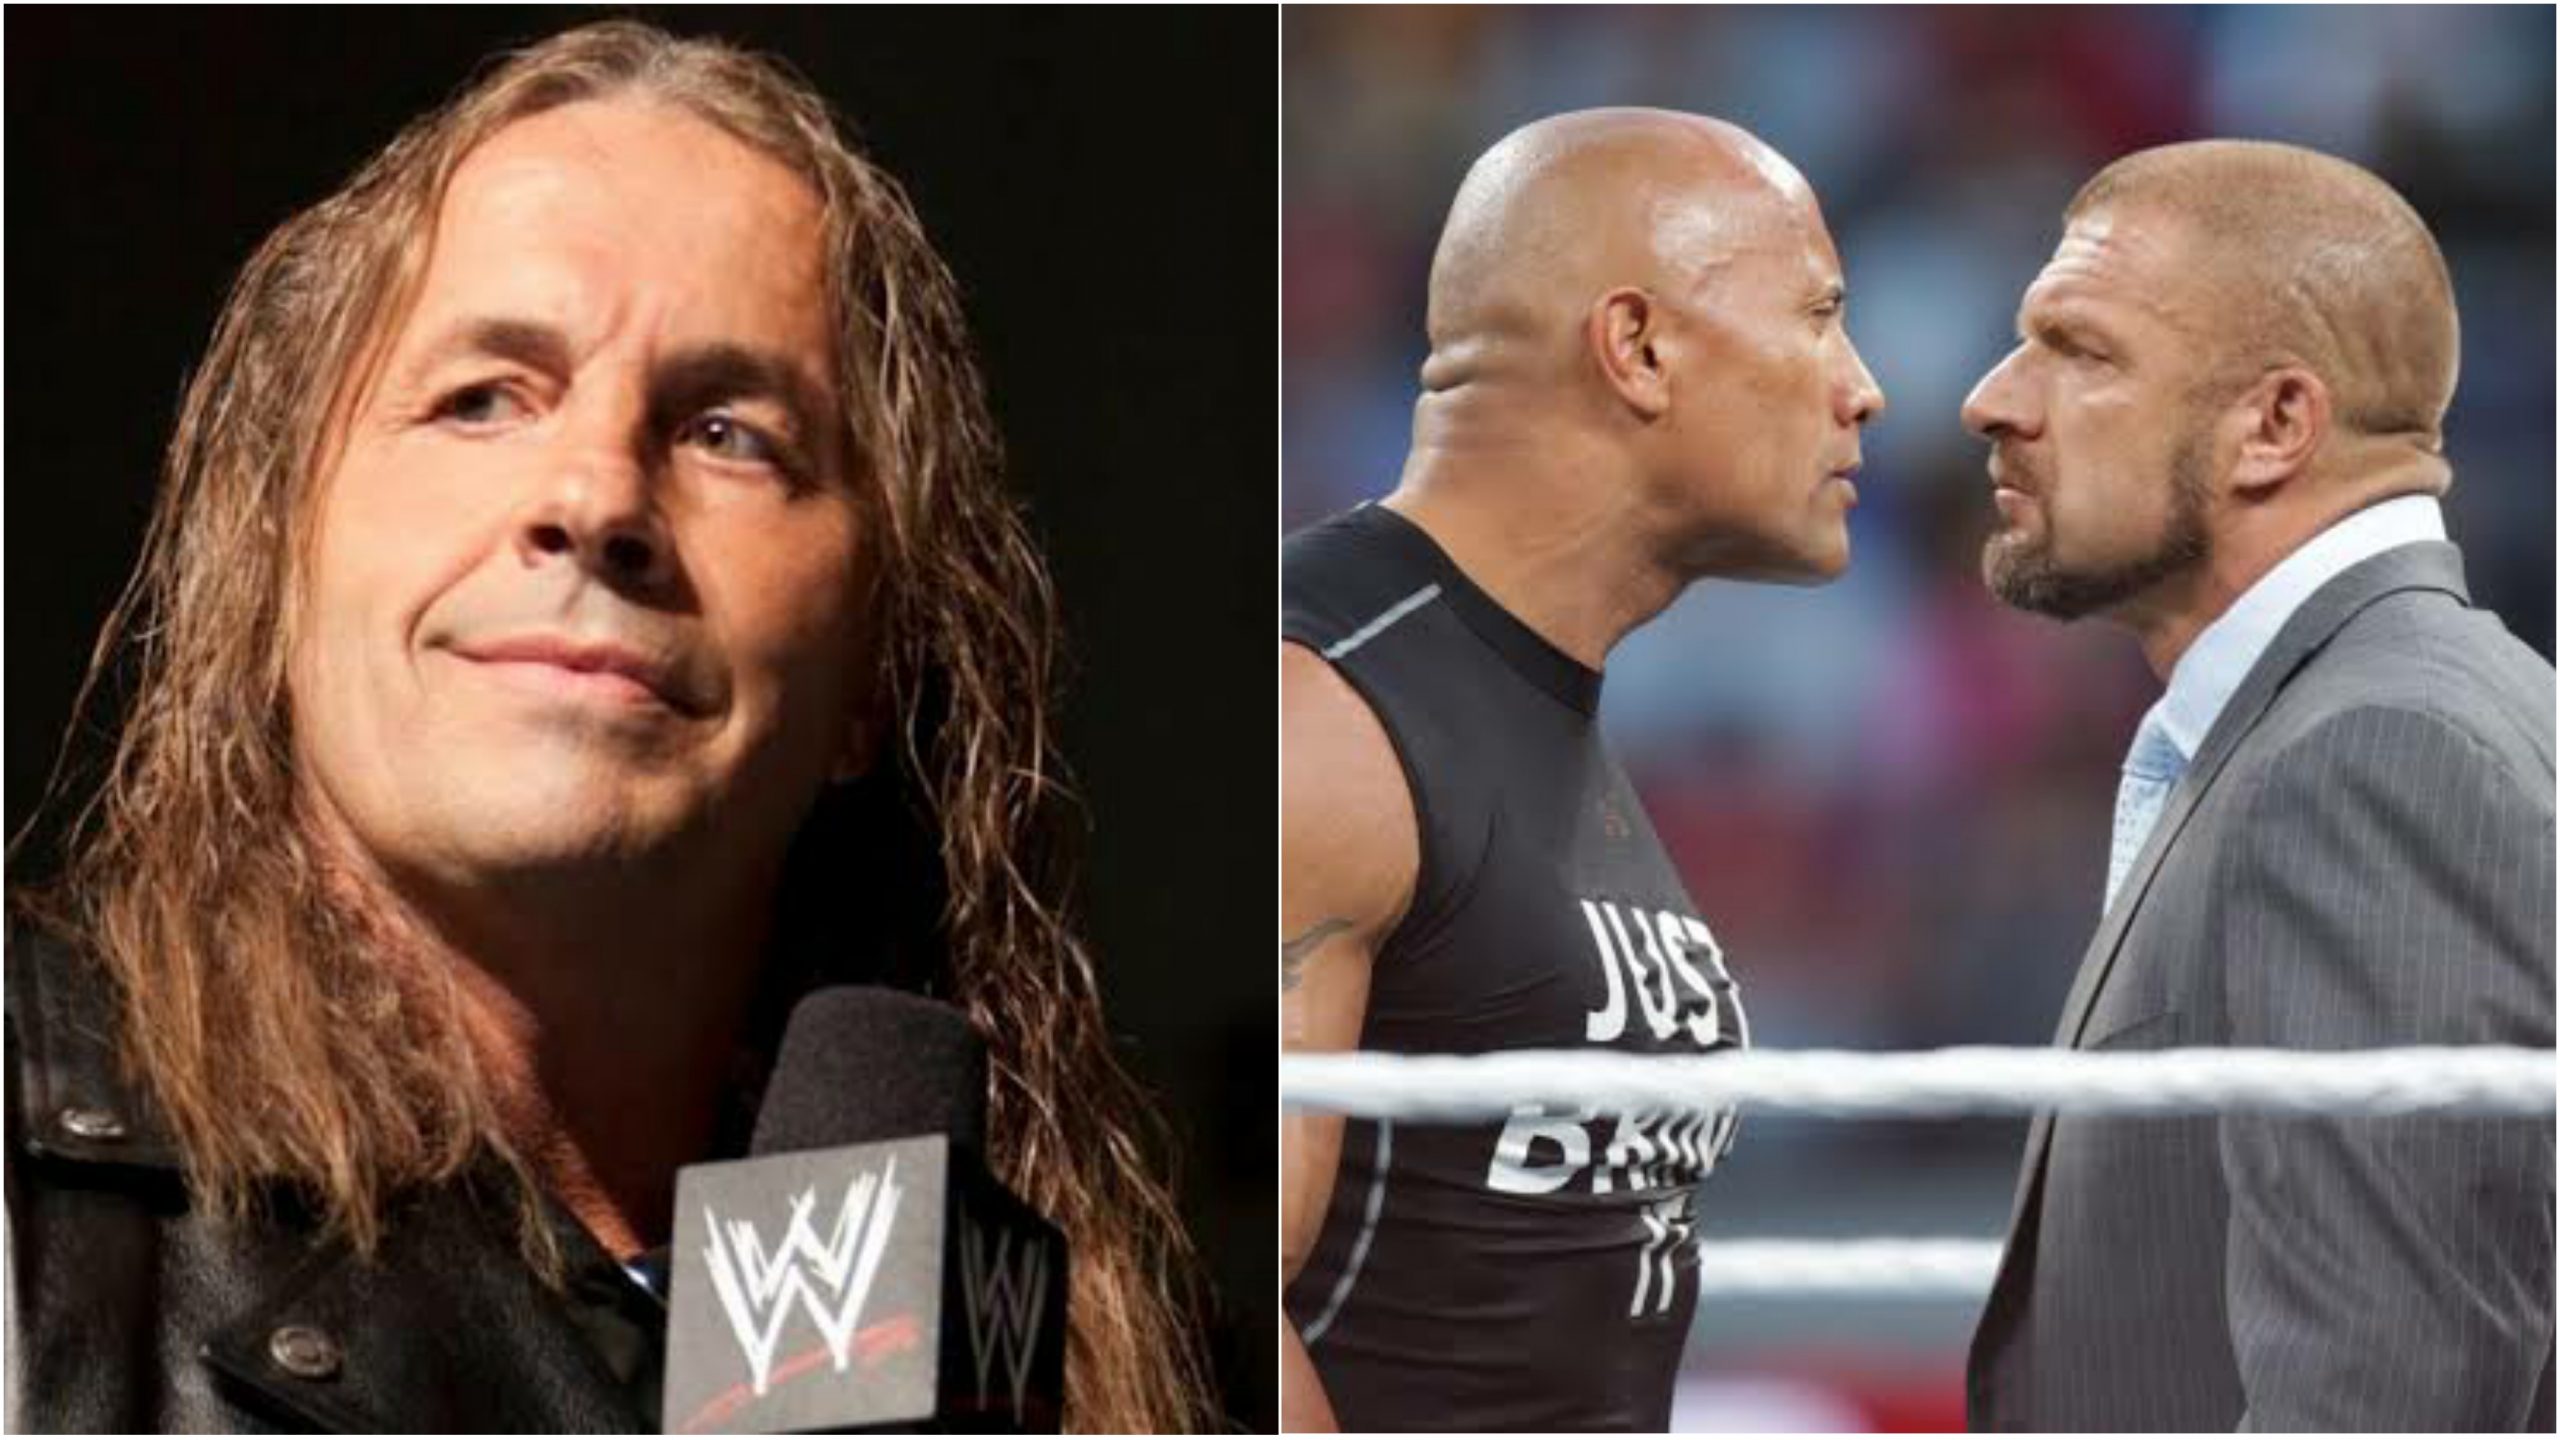 Bret Hart reveals the tiff between The Rock and Triple H